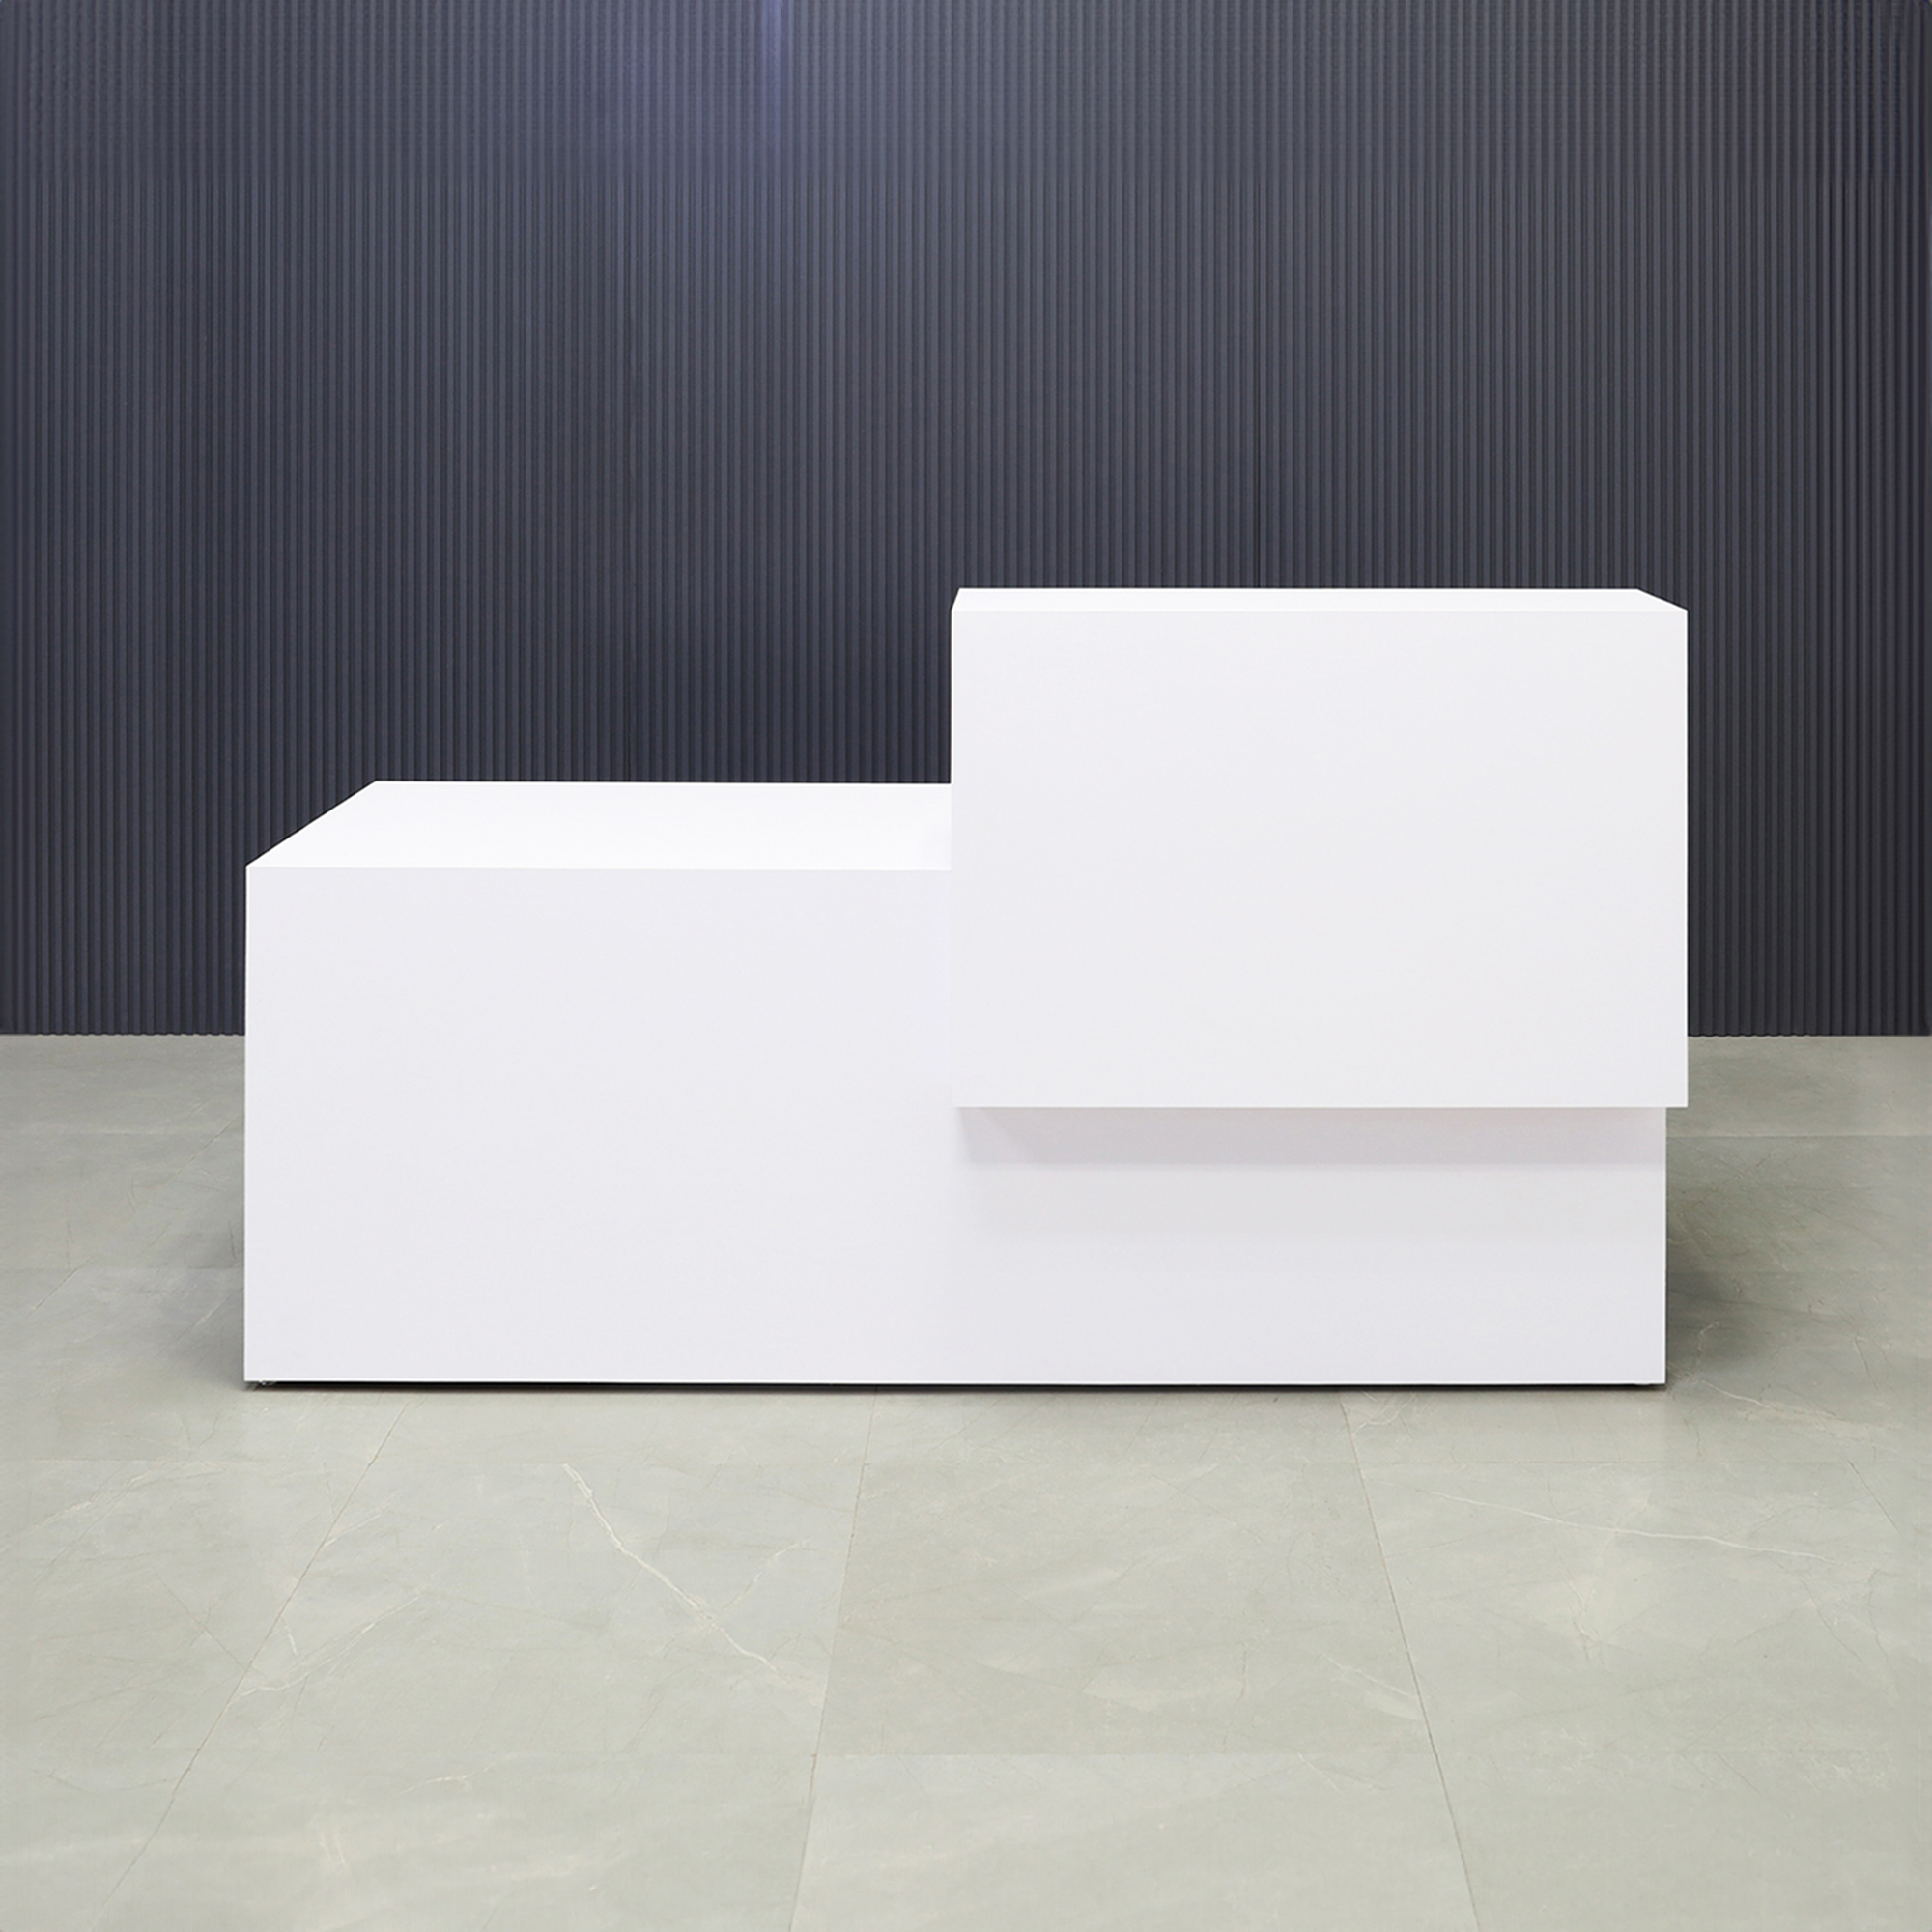 90-inch Los Angeles ADA Compliant Custom Reception Desk, right side when facing front in white gloss laminate counter & desk, no LED, shown here.